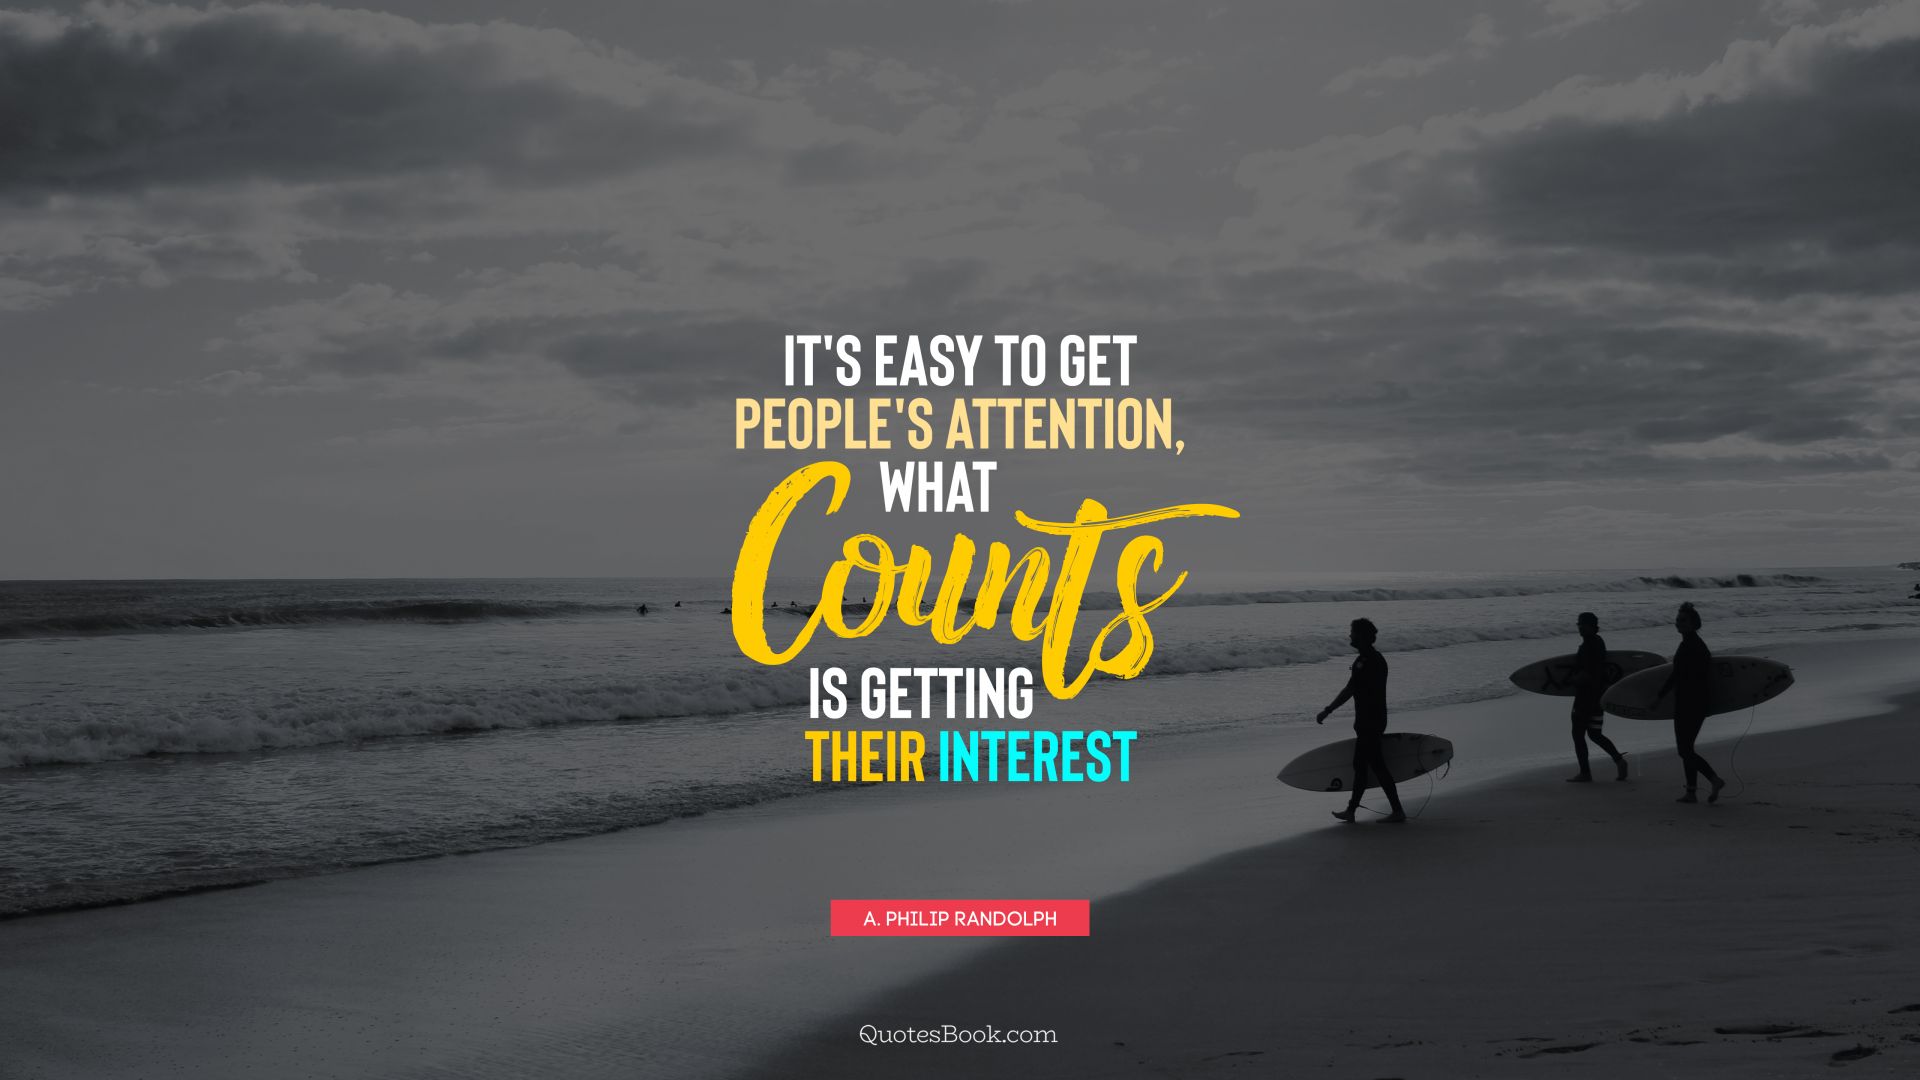 It's easy to get people's attention, what counts is getting their interest. - Quote by A. Philip Randolph